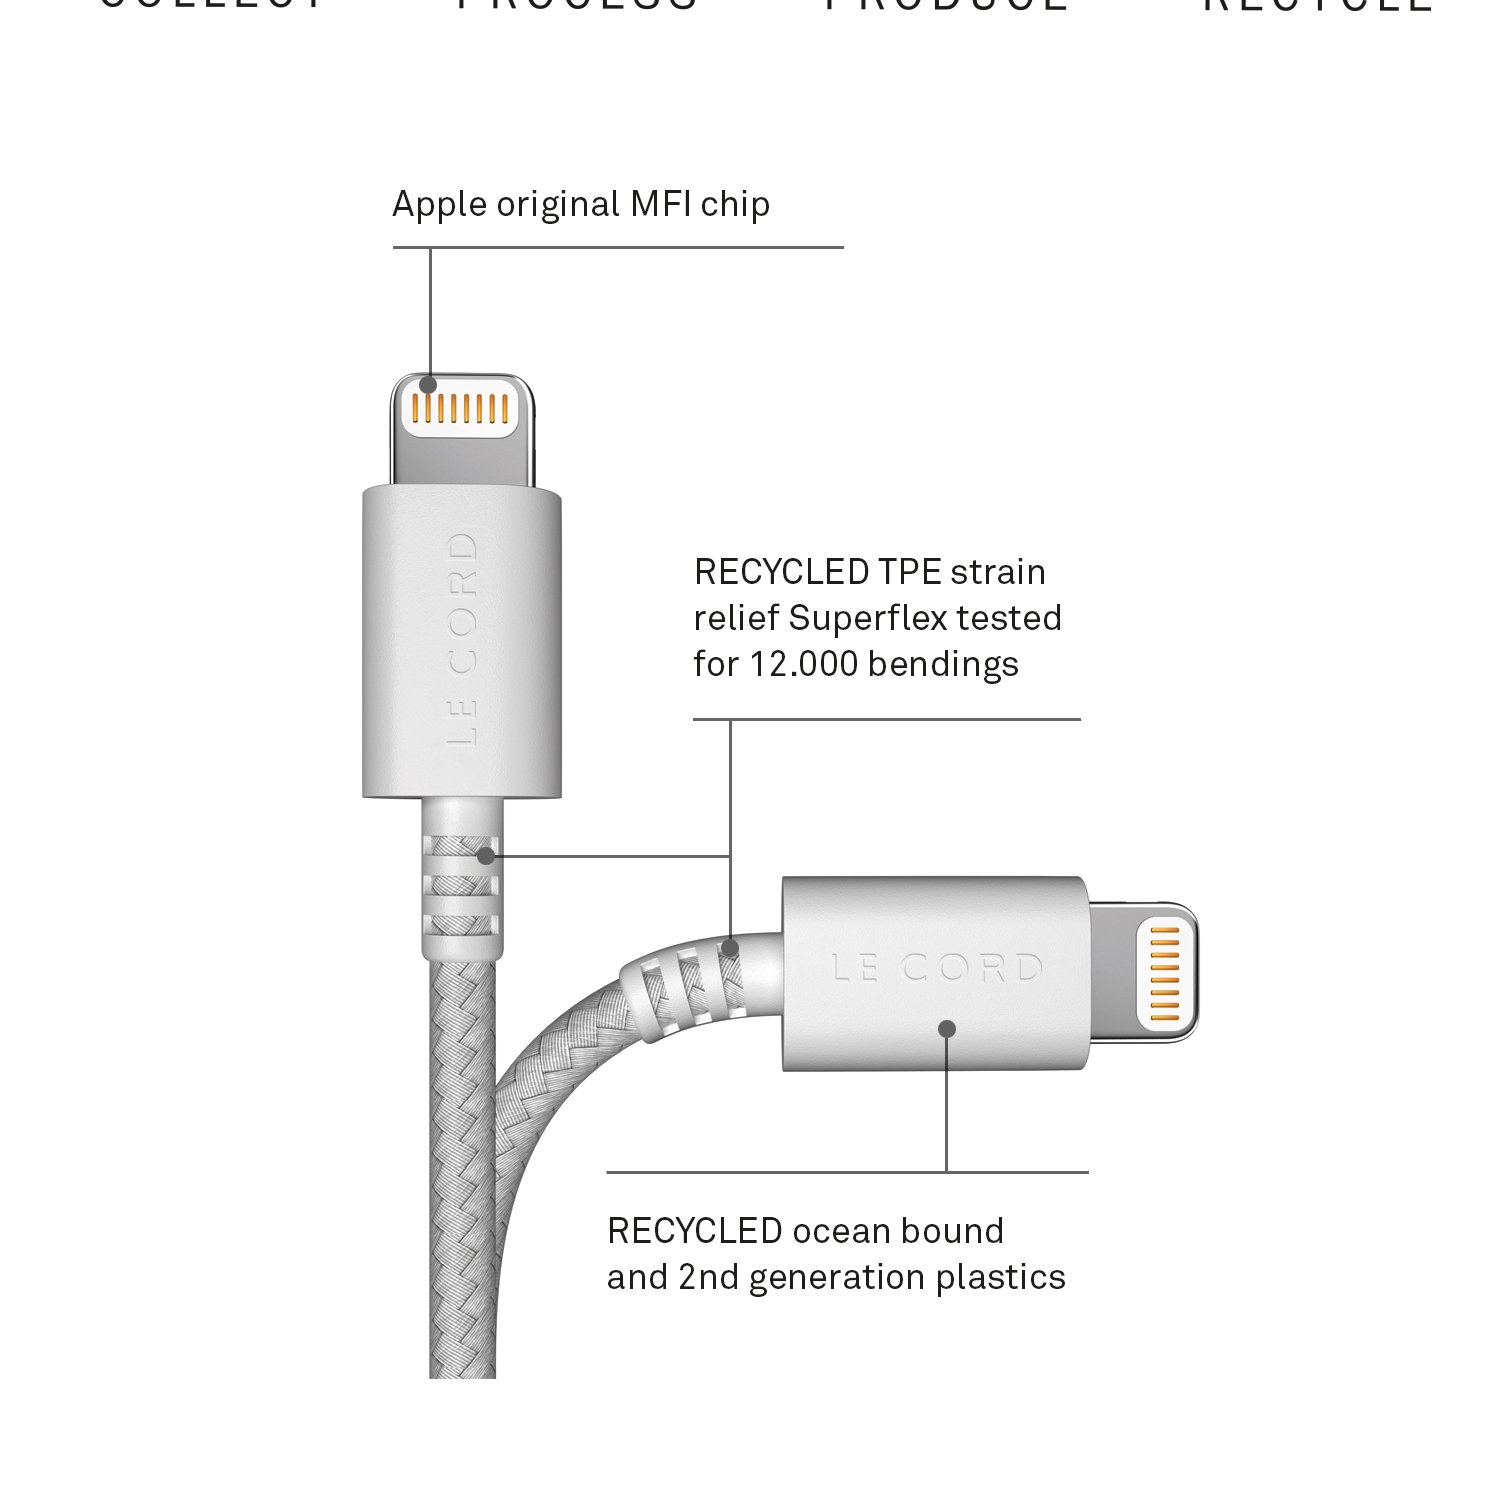 LE CORD Plum recyceltes iPhone Lightning Kabel